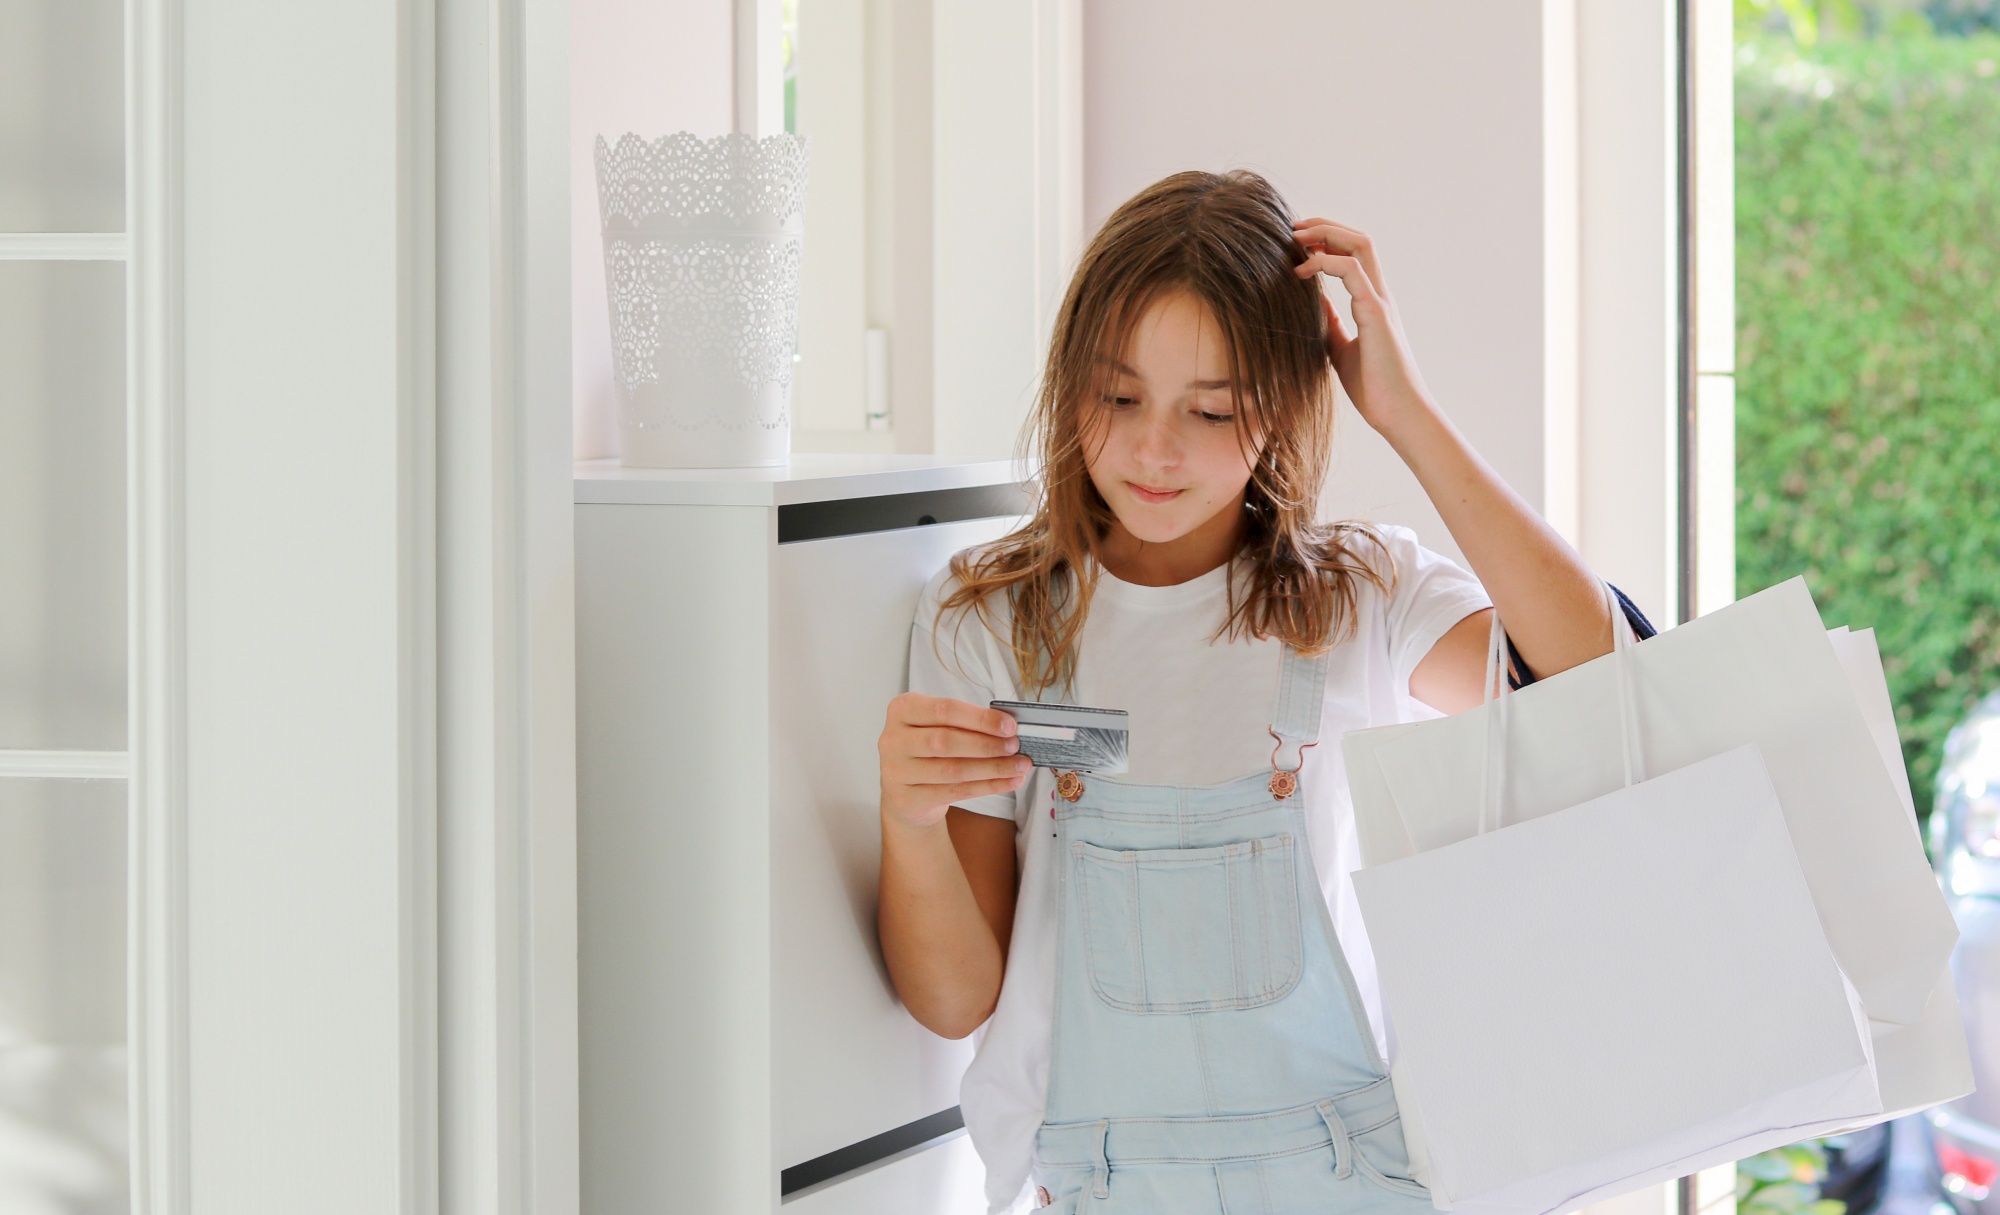 Teaching kids about money, confused tween girl with shopping bags looking at credit card